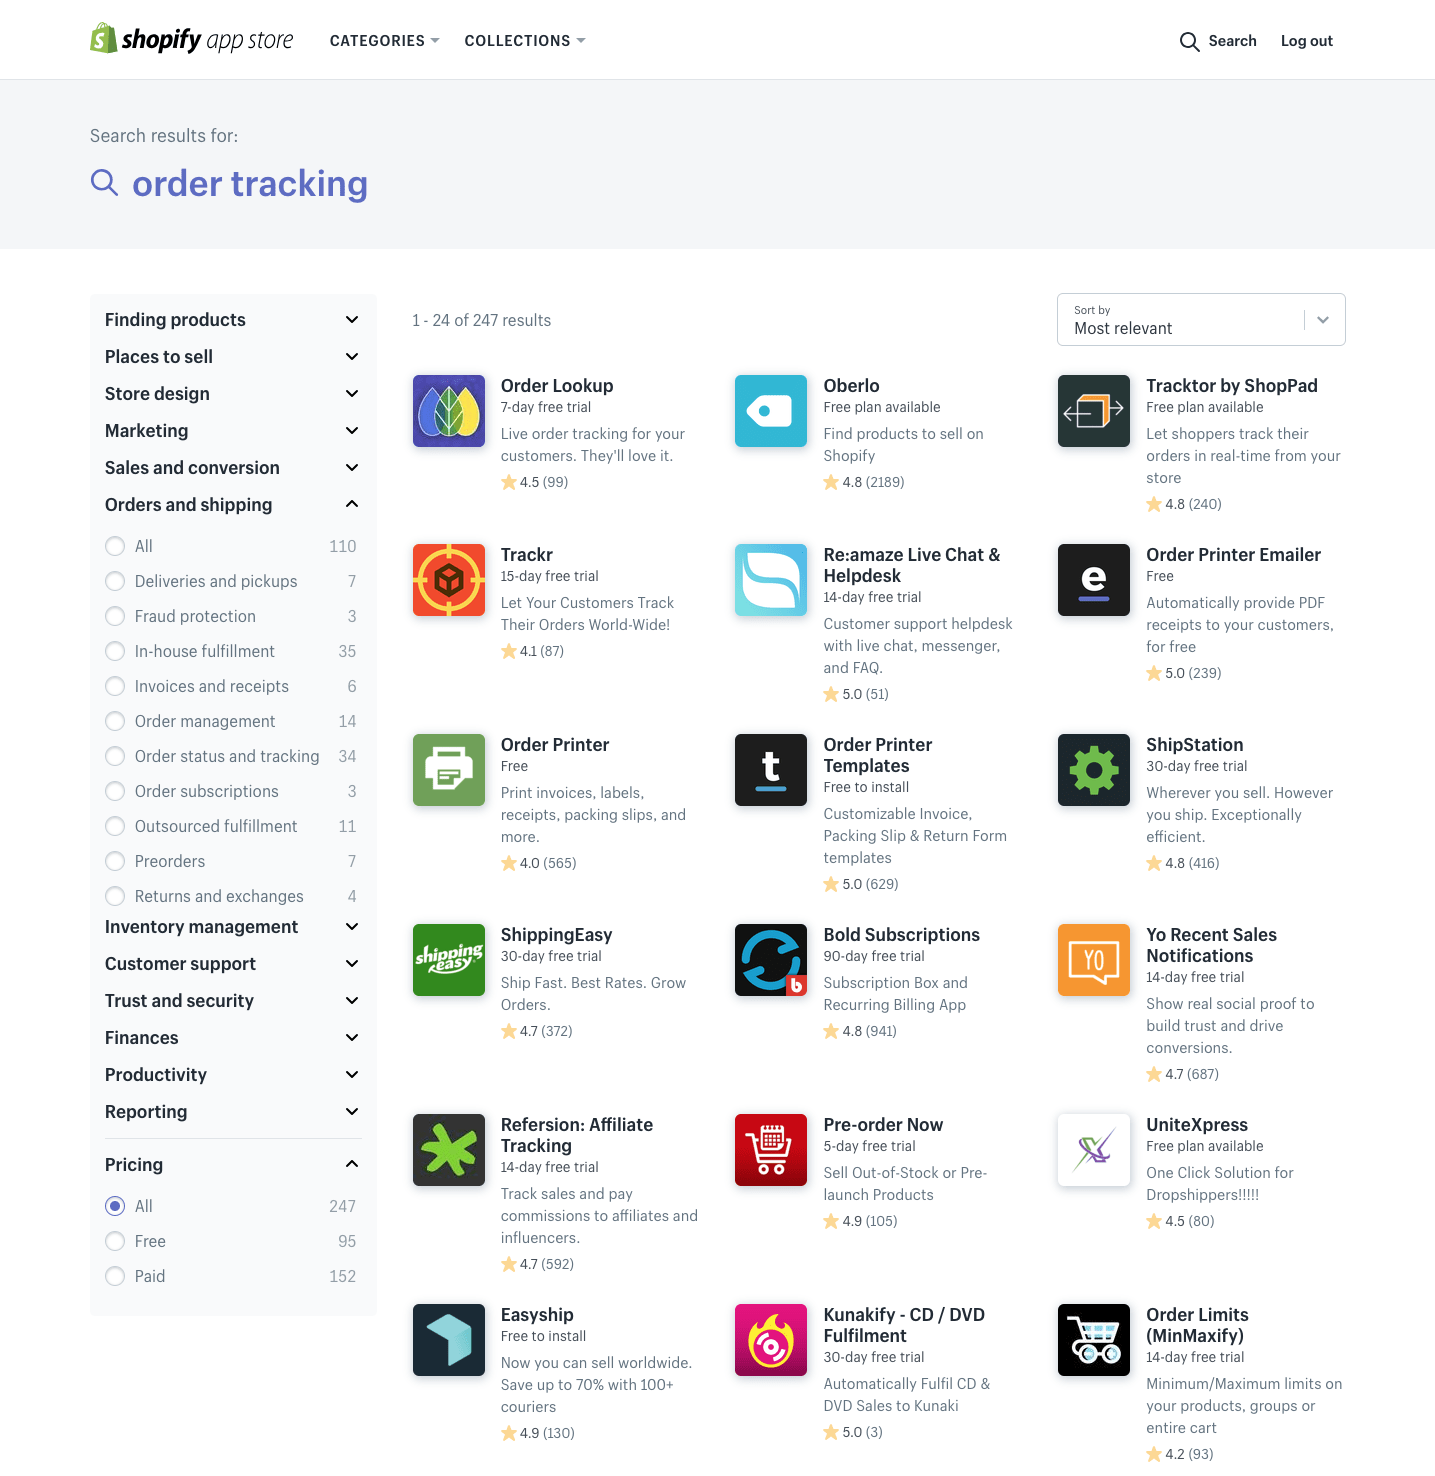 app store success: search results